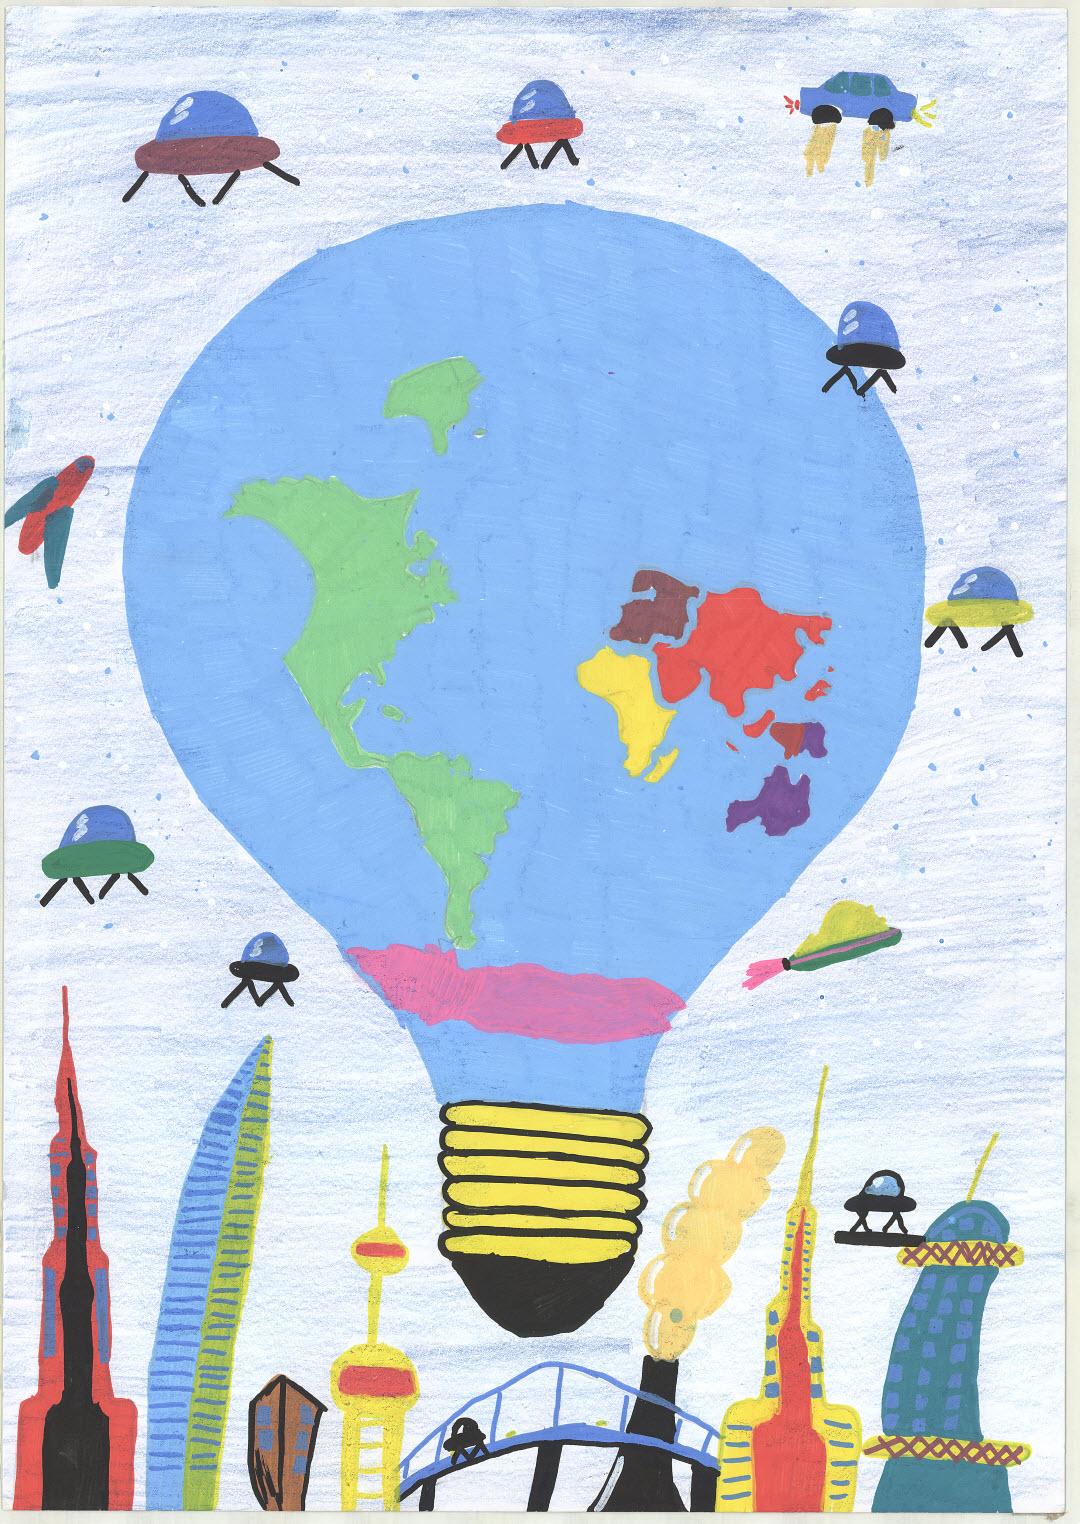 Shows the planet in the form of a lightbulb, spaceships, and buildings